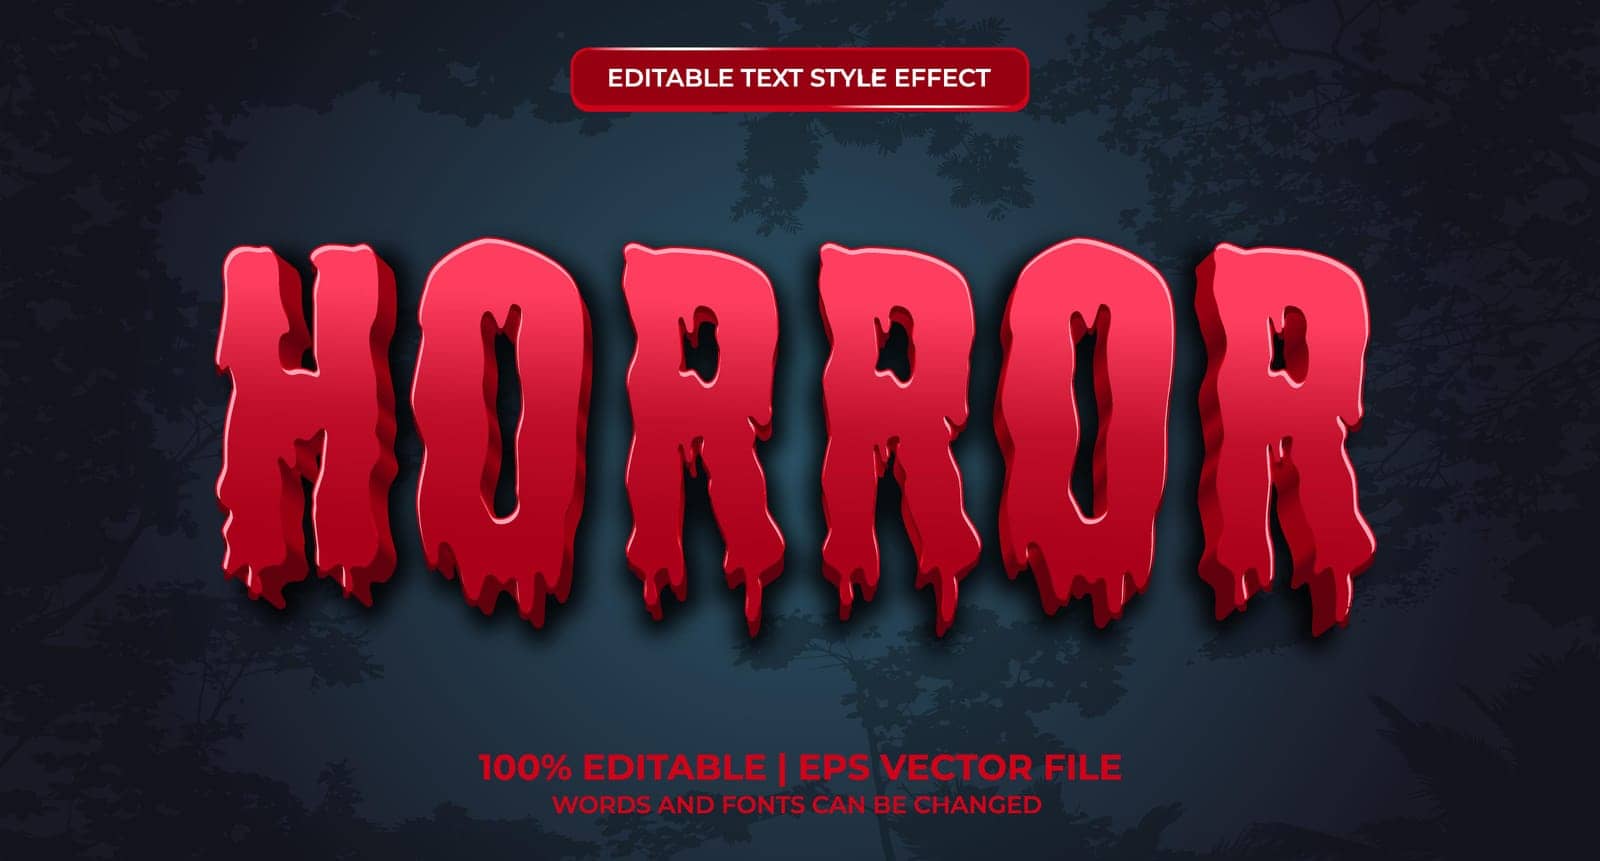 Horror editable text effect. Blood text style by Aozora